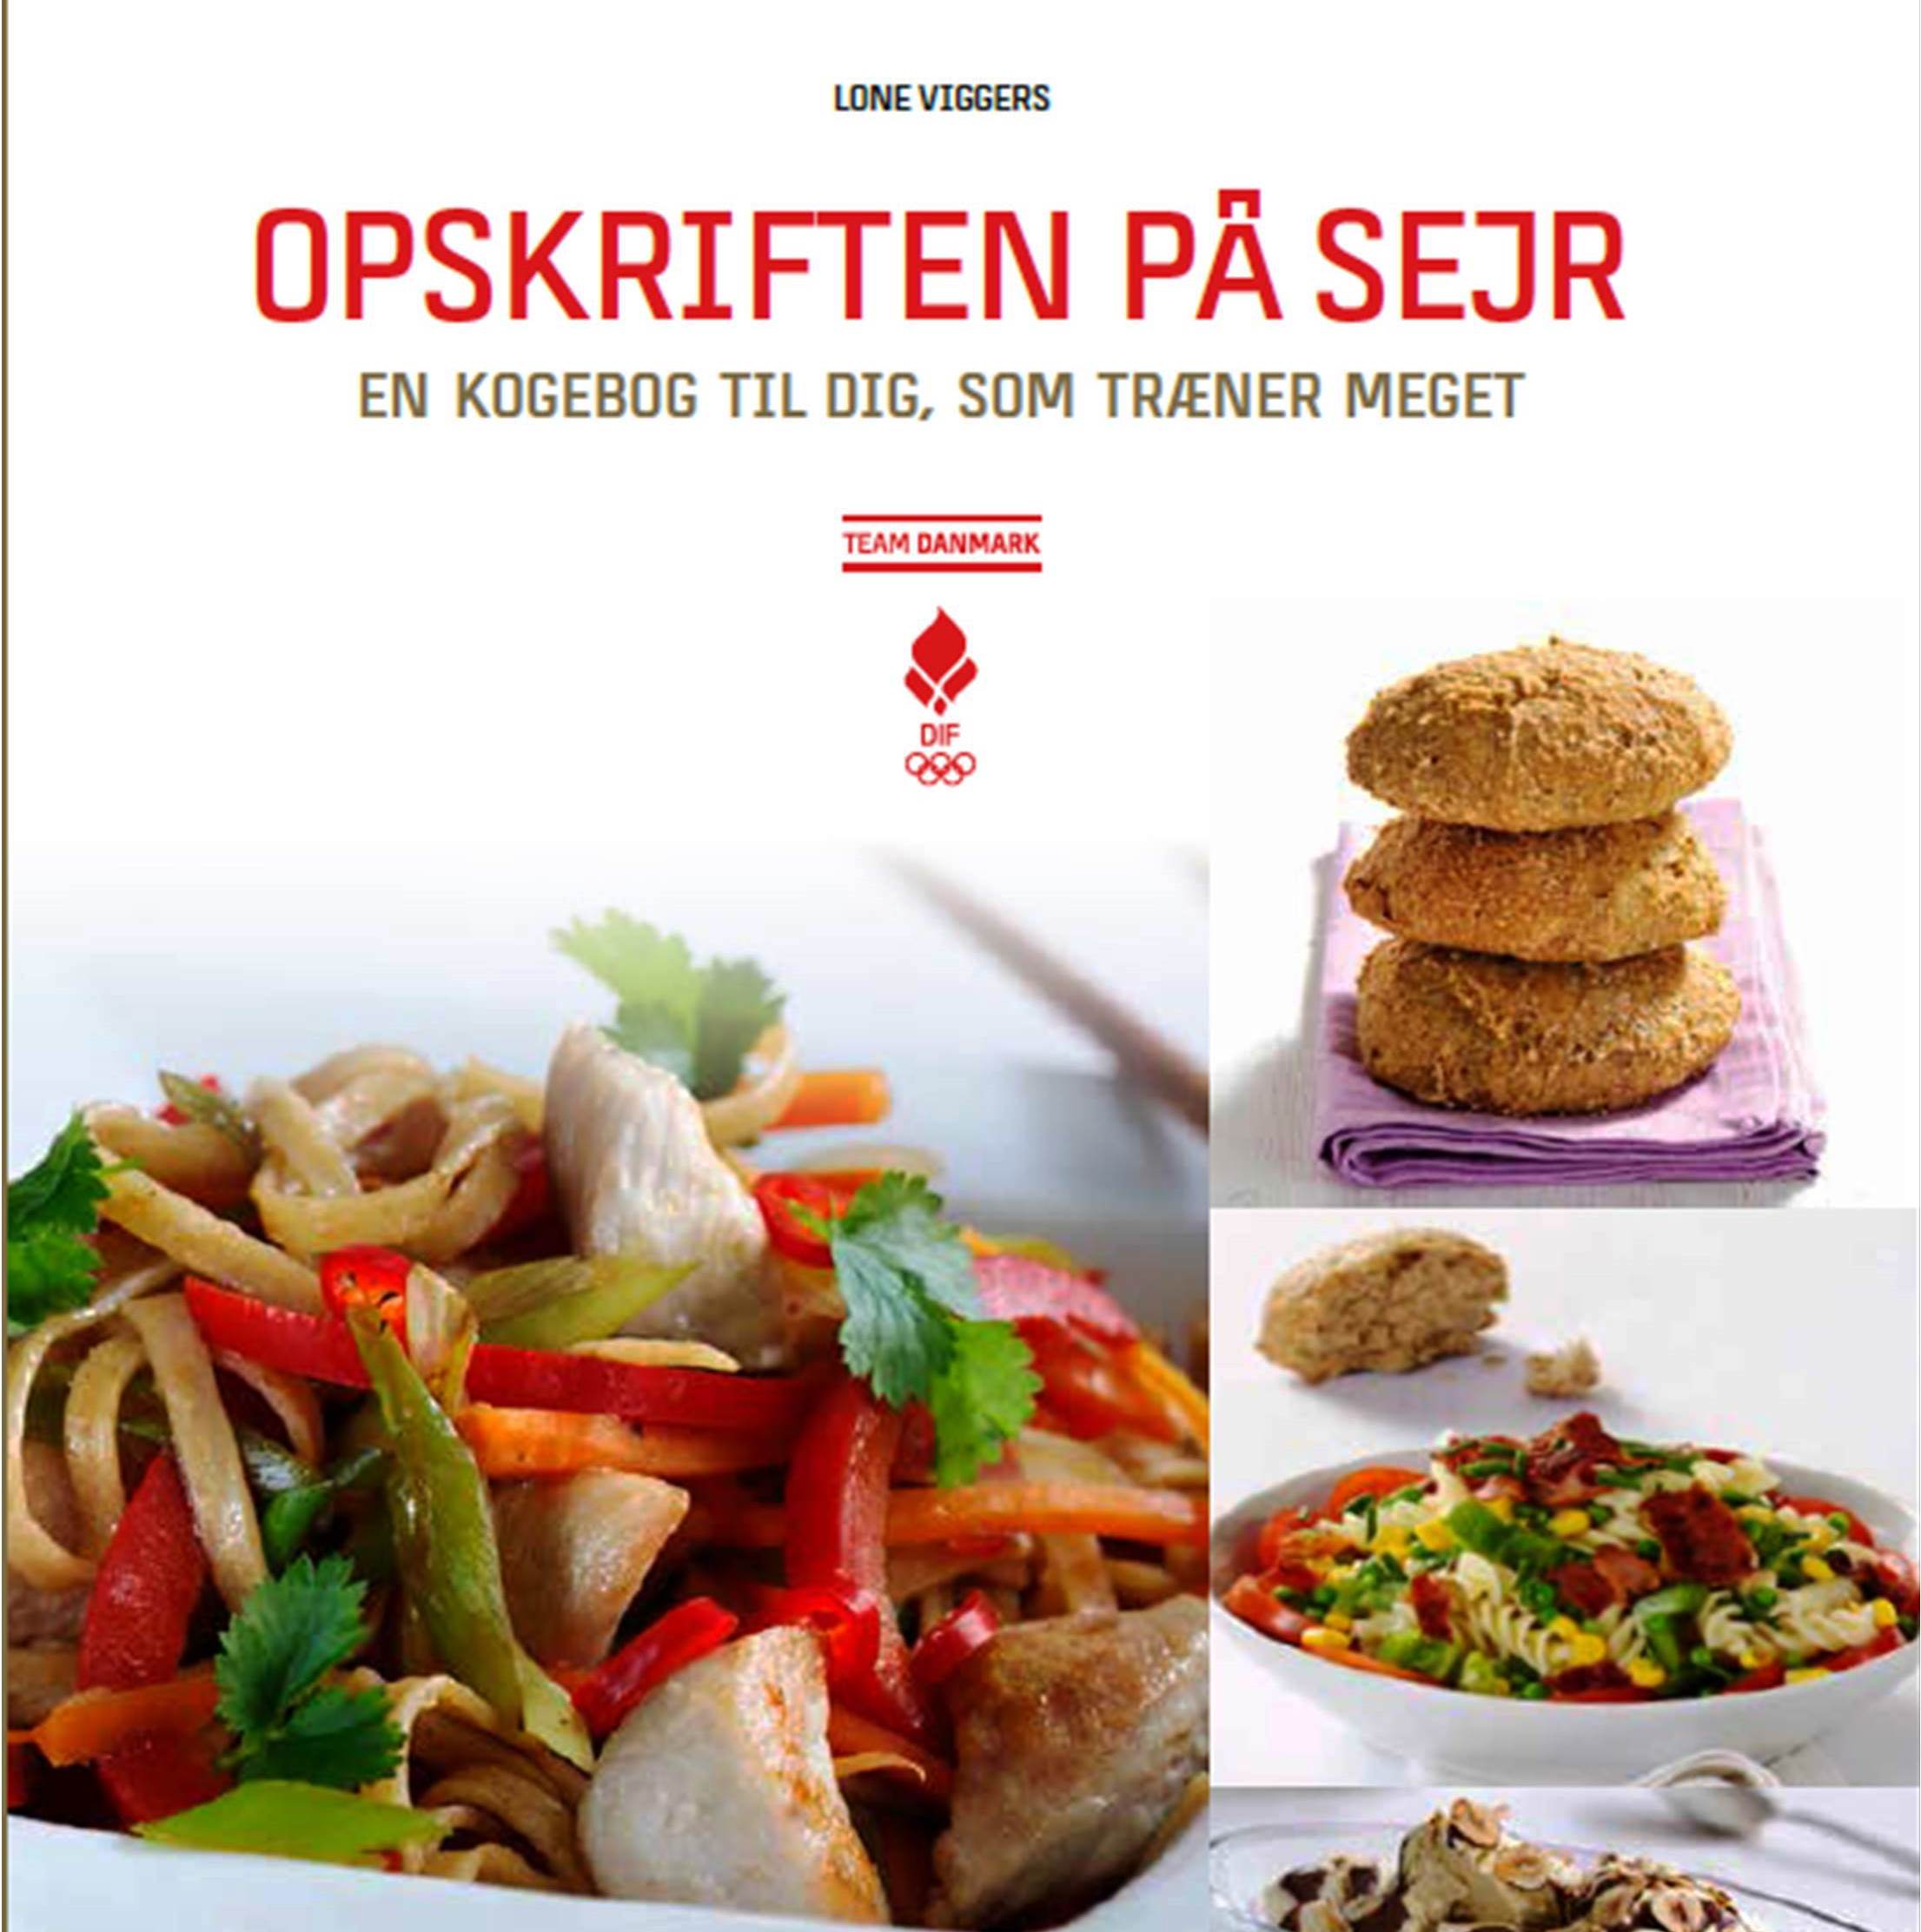 A new healthy eating book for Danish athletes has been launched ©Lone Viggers